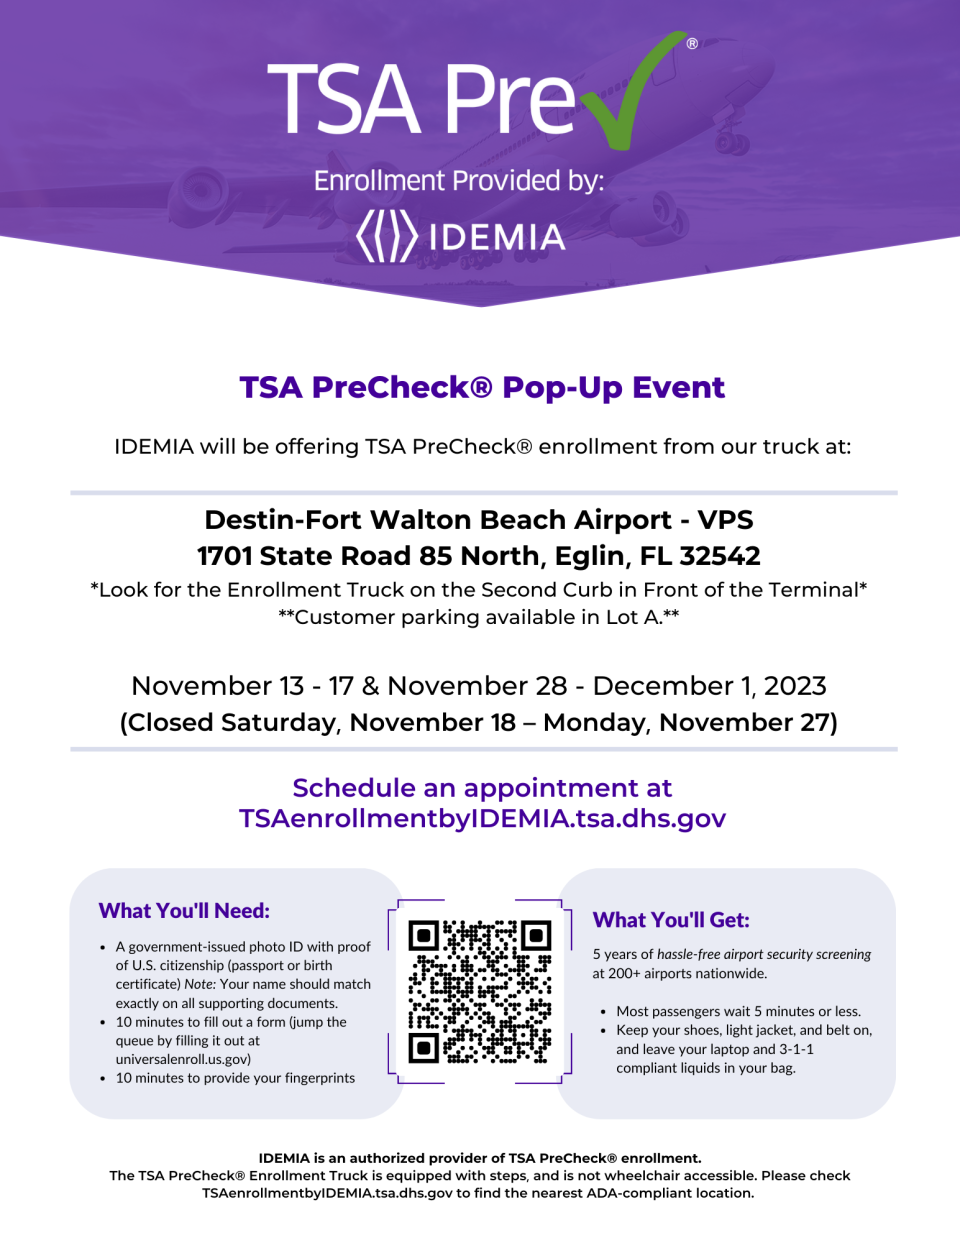 By scanning the QR code on the flyer, passengers who want to take advantage of the TSA PreCheck Enrollment event can do so.